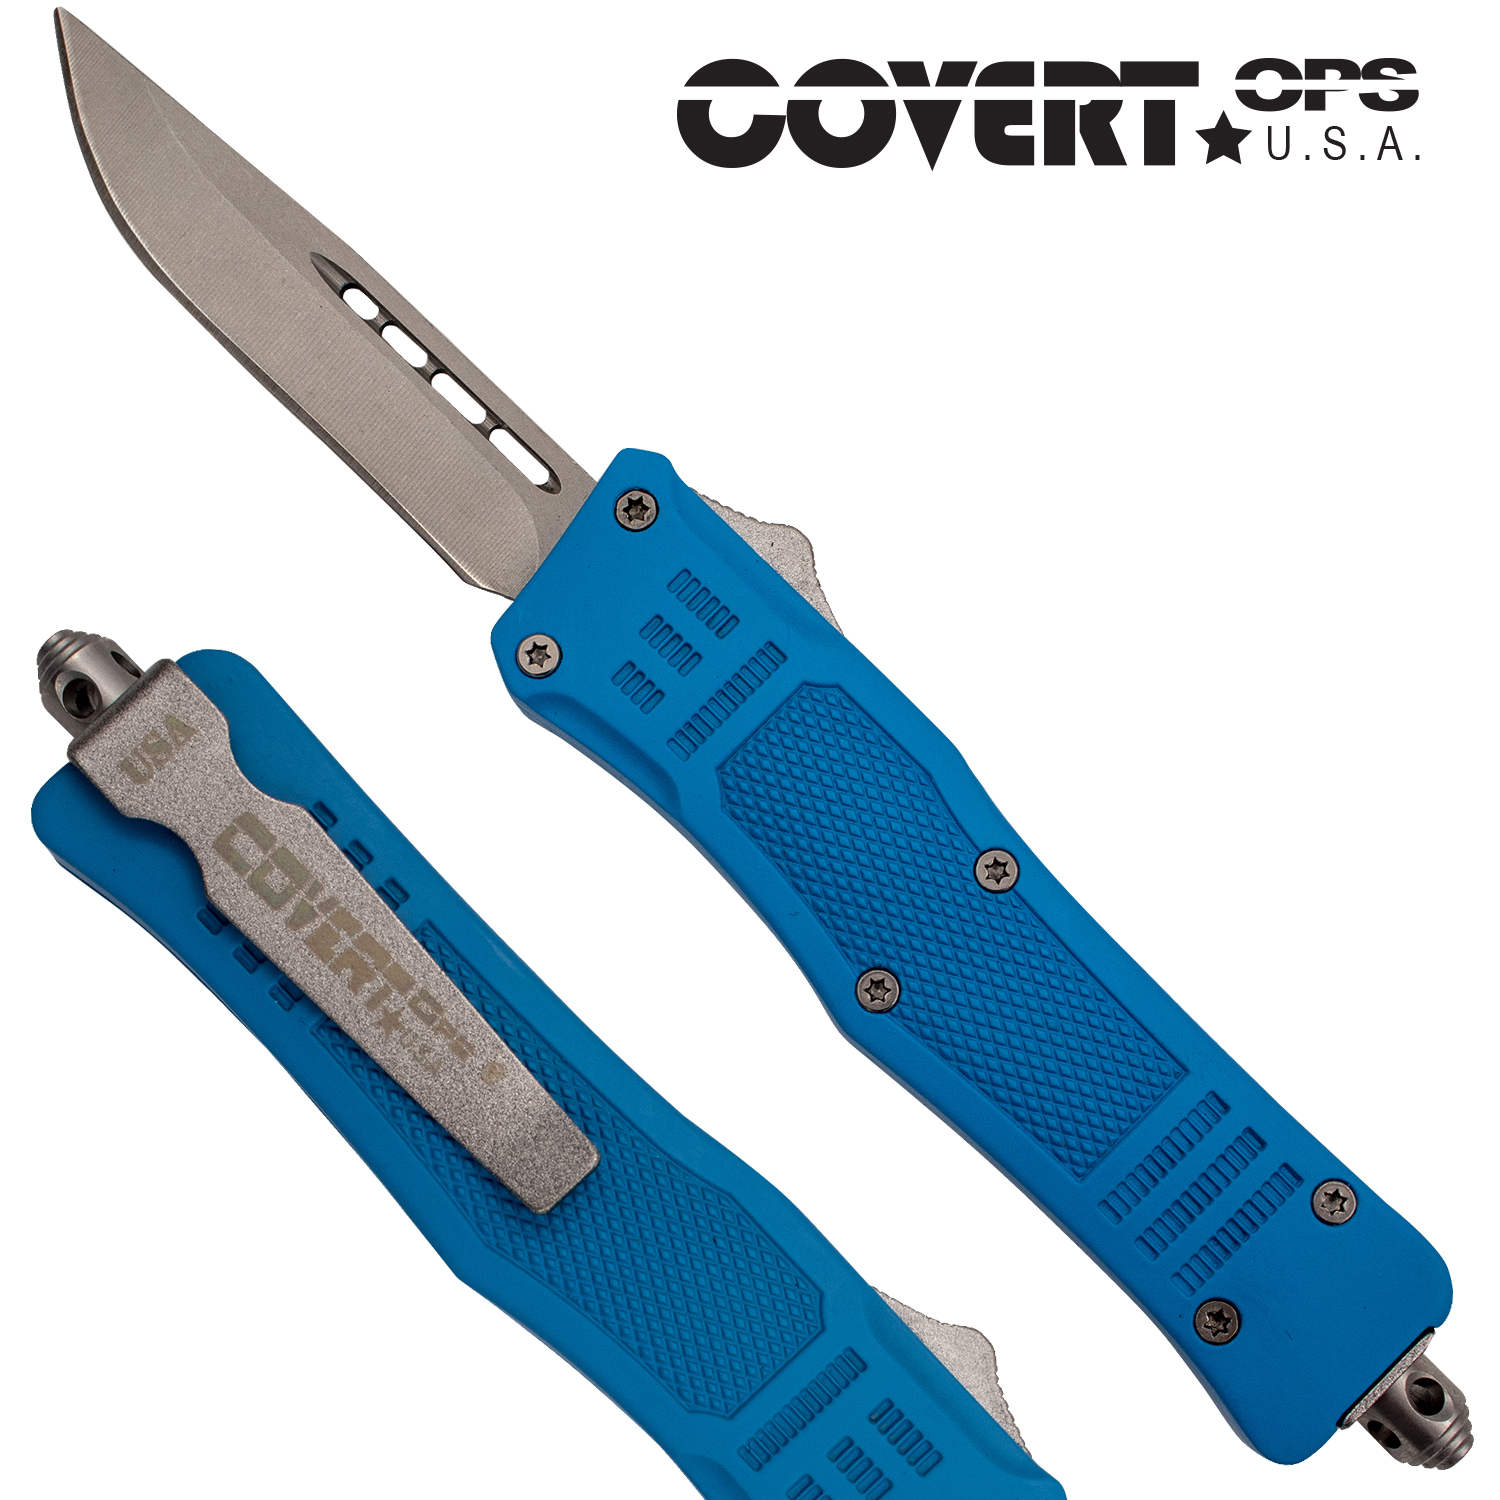 Covert OPS USA OTF Automatic Knife 7 inch overall Blue Handle Silver Drop Point D2 Steel Blade